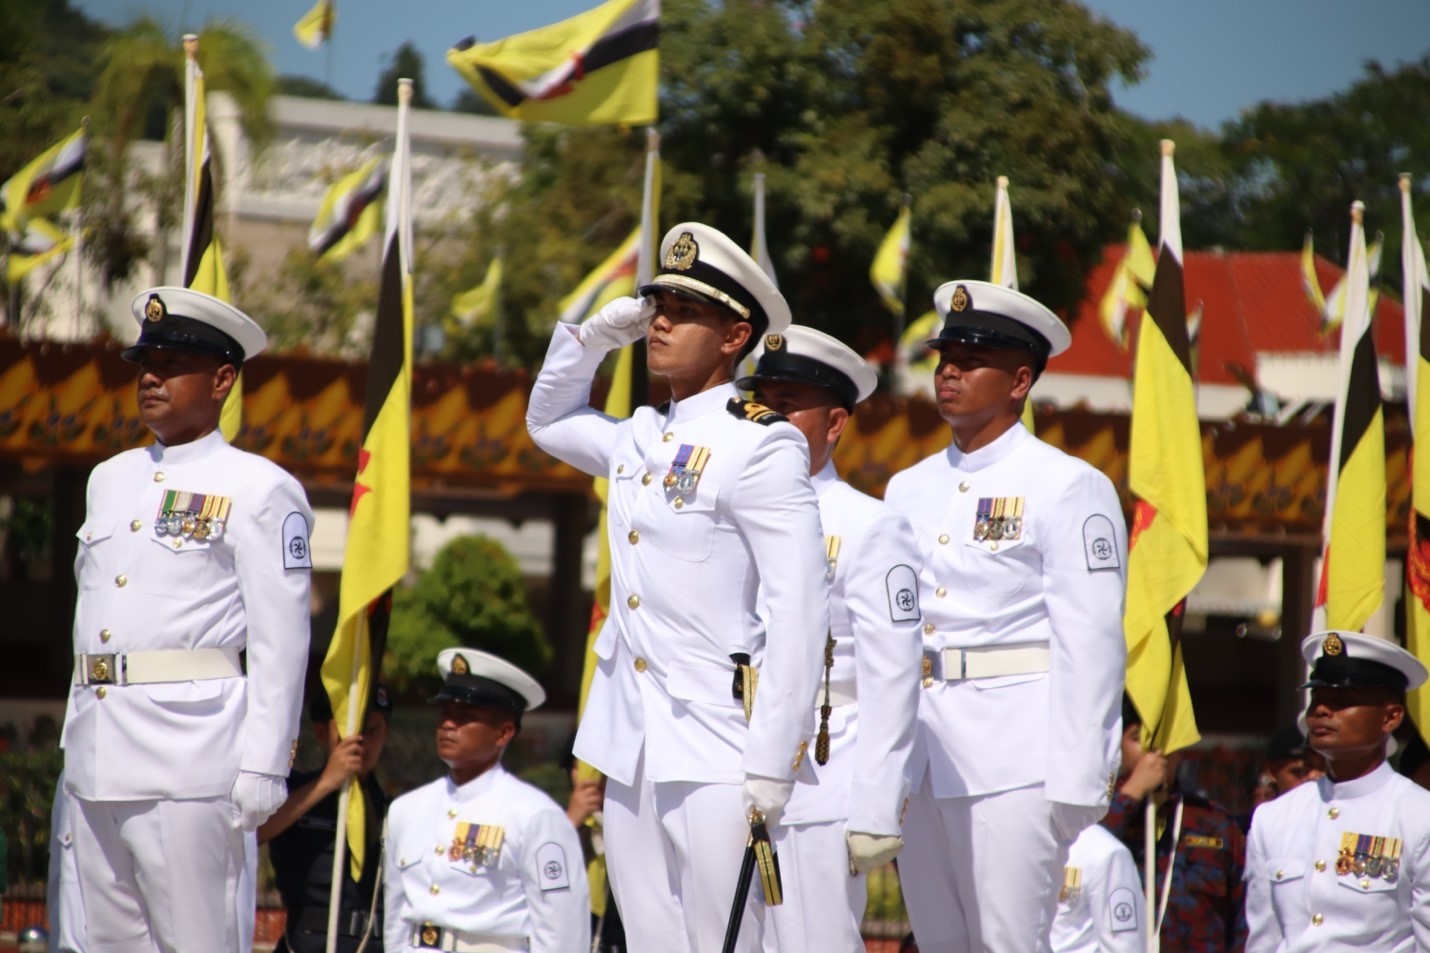 FLAG LOWERING CEREMONY IN CONJUNCTION WITH BRUNEI DARUSSALAM'S 40th NATIONAL DAY